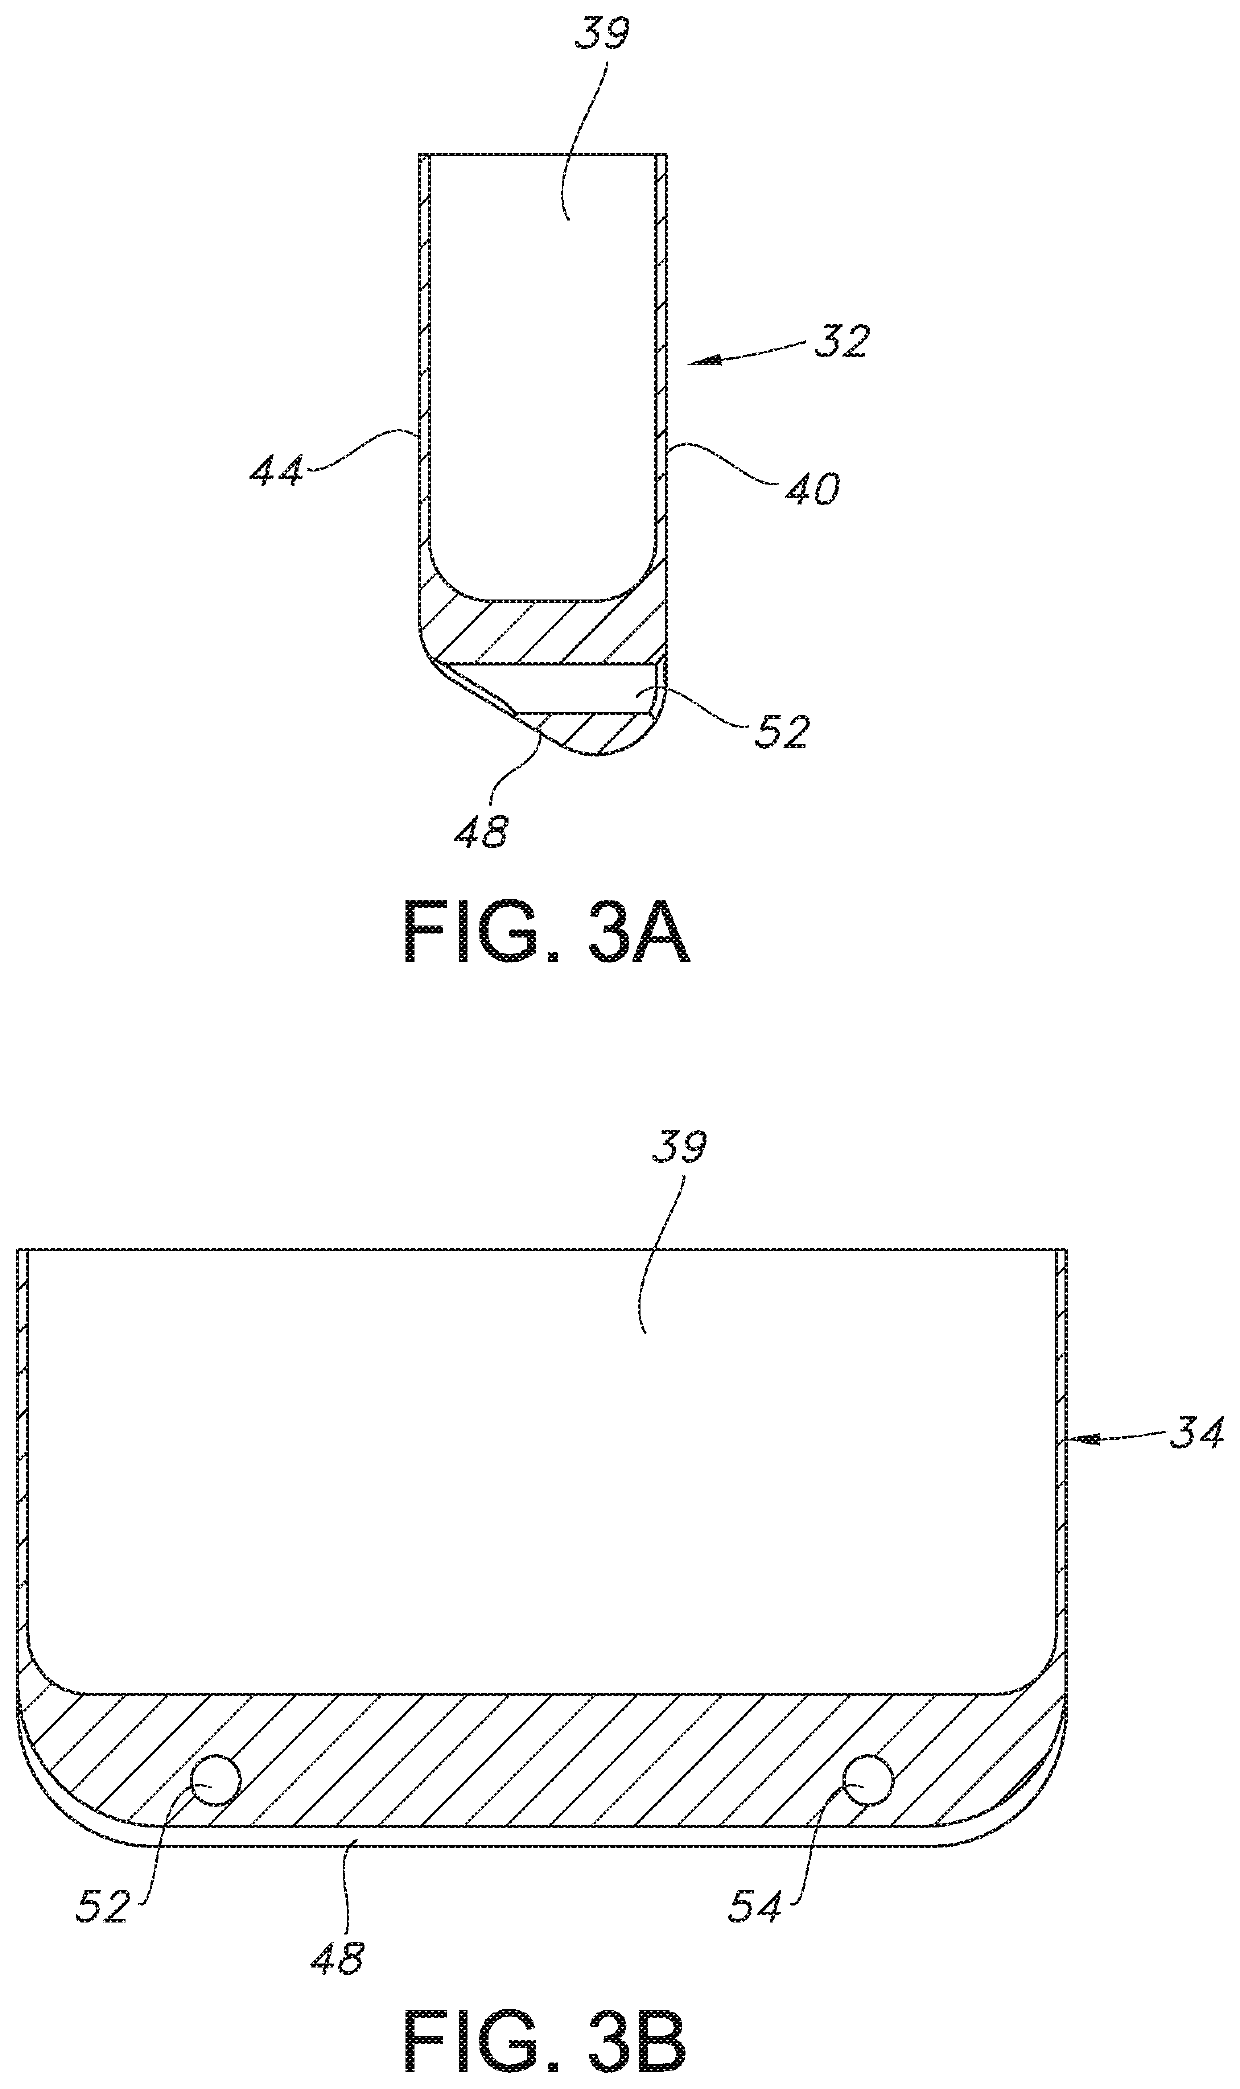 Implantable pulse generator with multiple suture ports